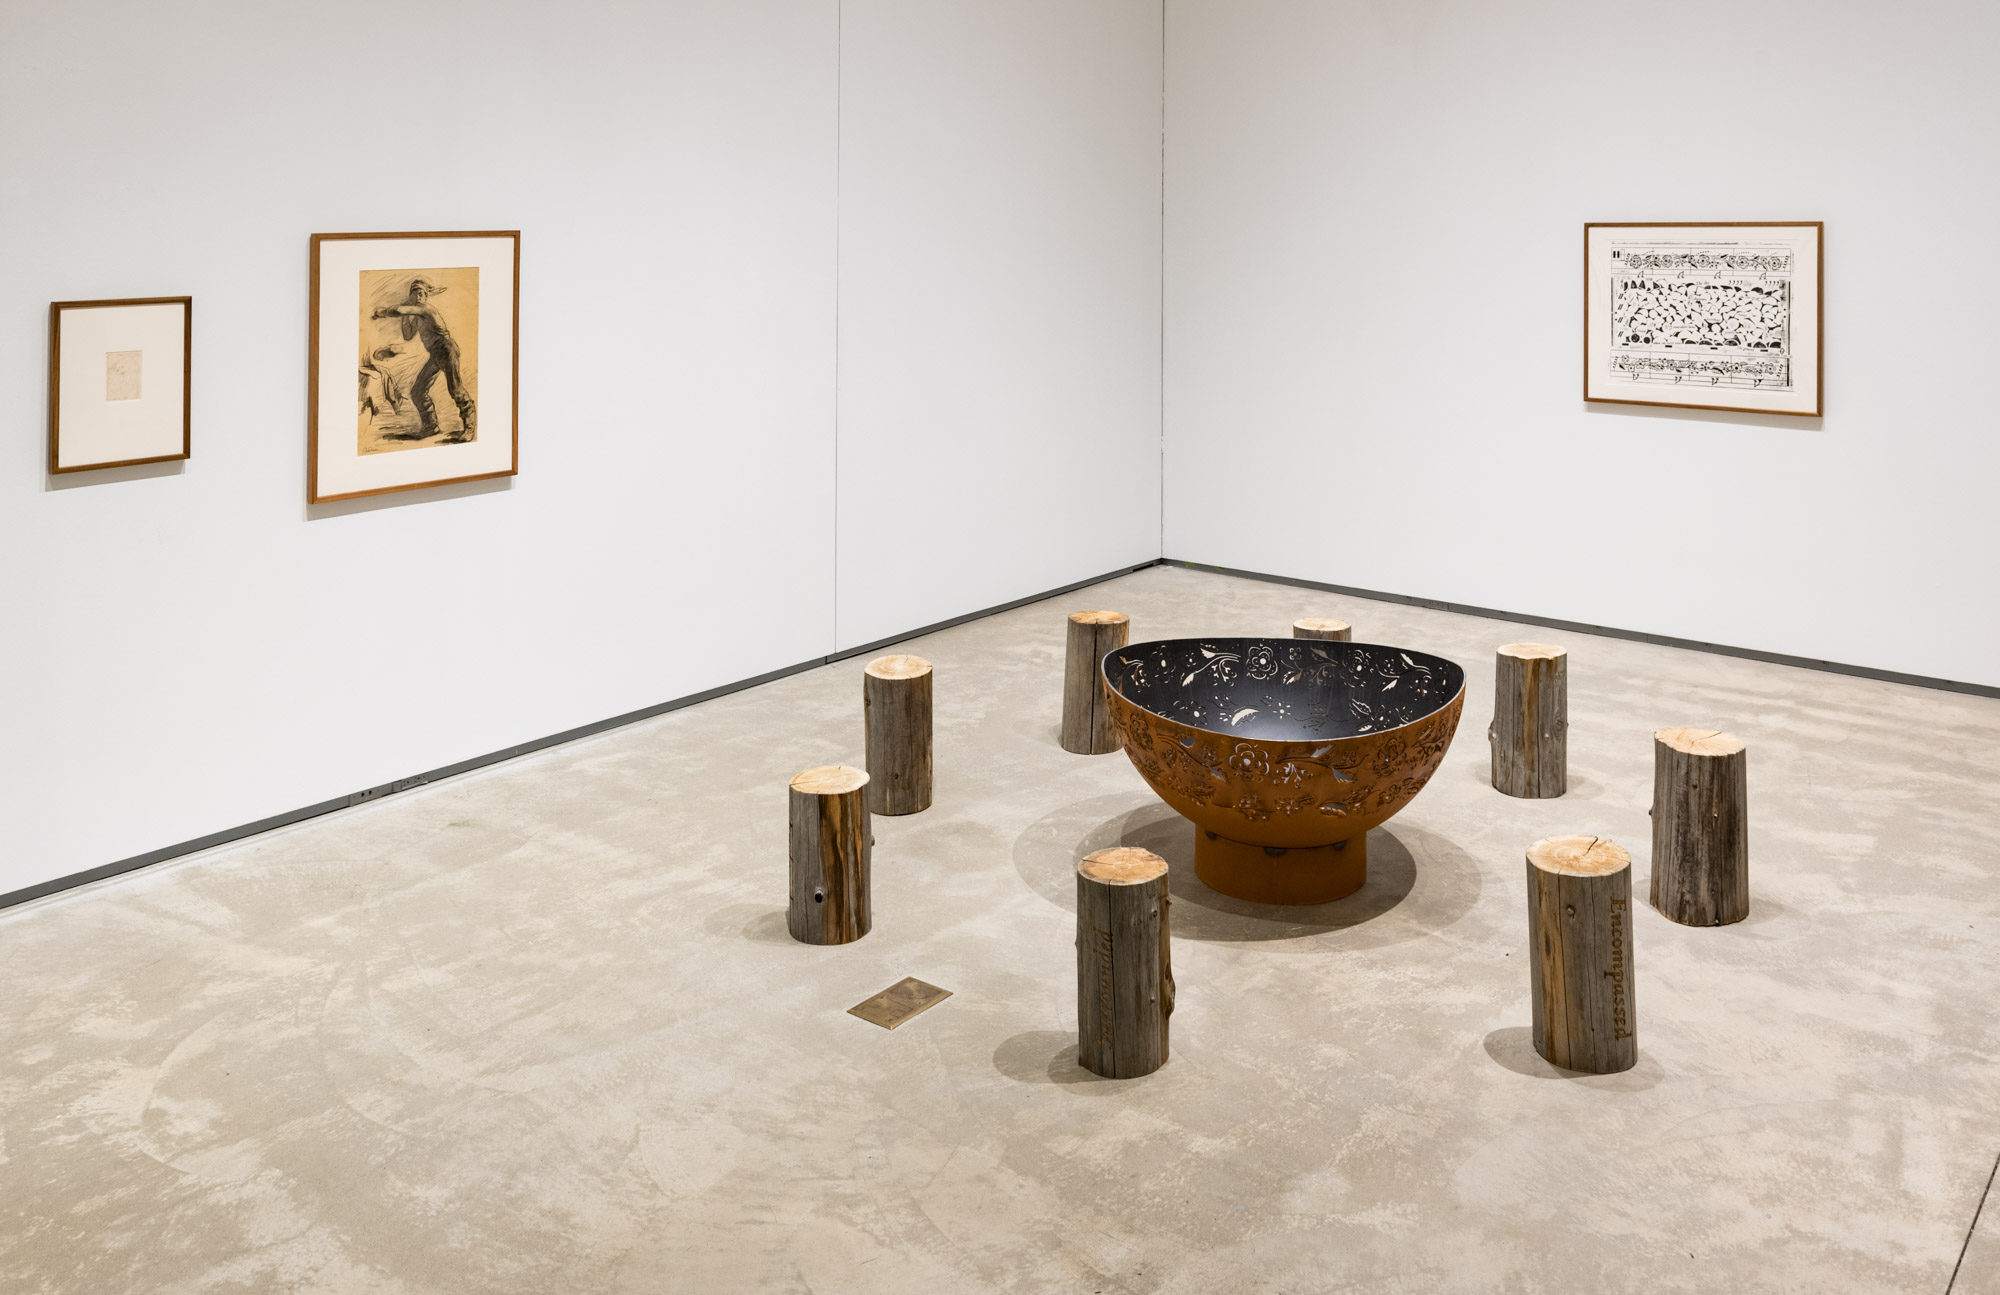 Tania Willard, Surrounded/Surrounding, 2018, wood burning fire ring, laser etched cedar woodlogs from SecwépemcTerritory